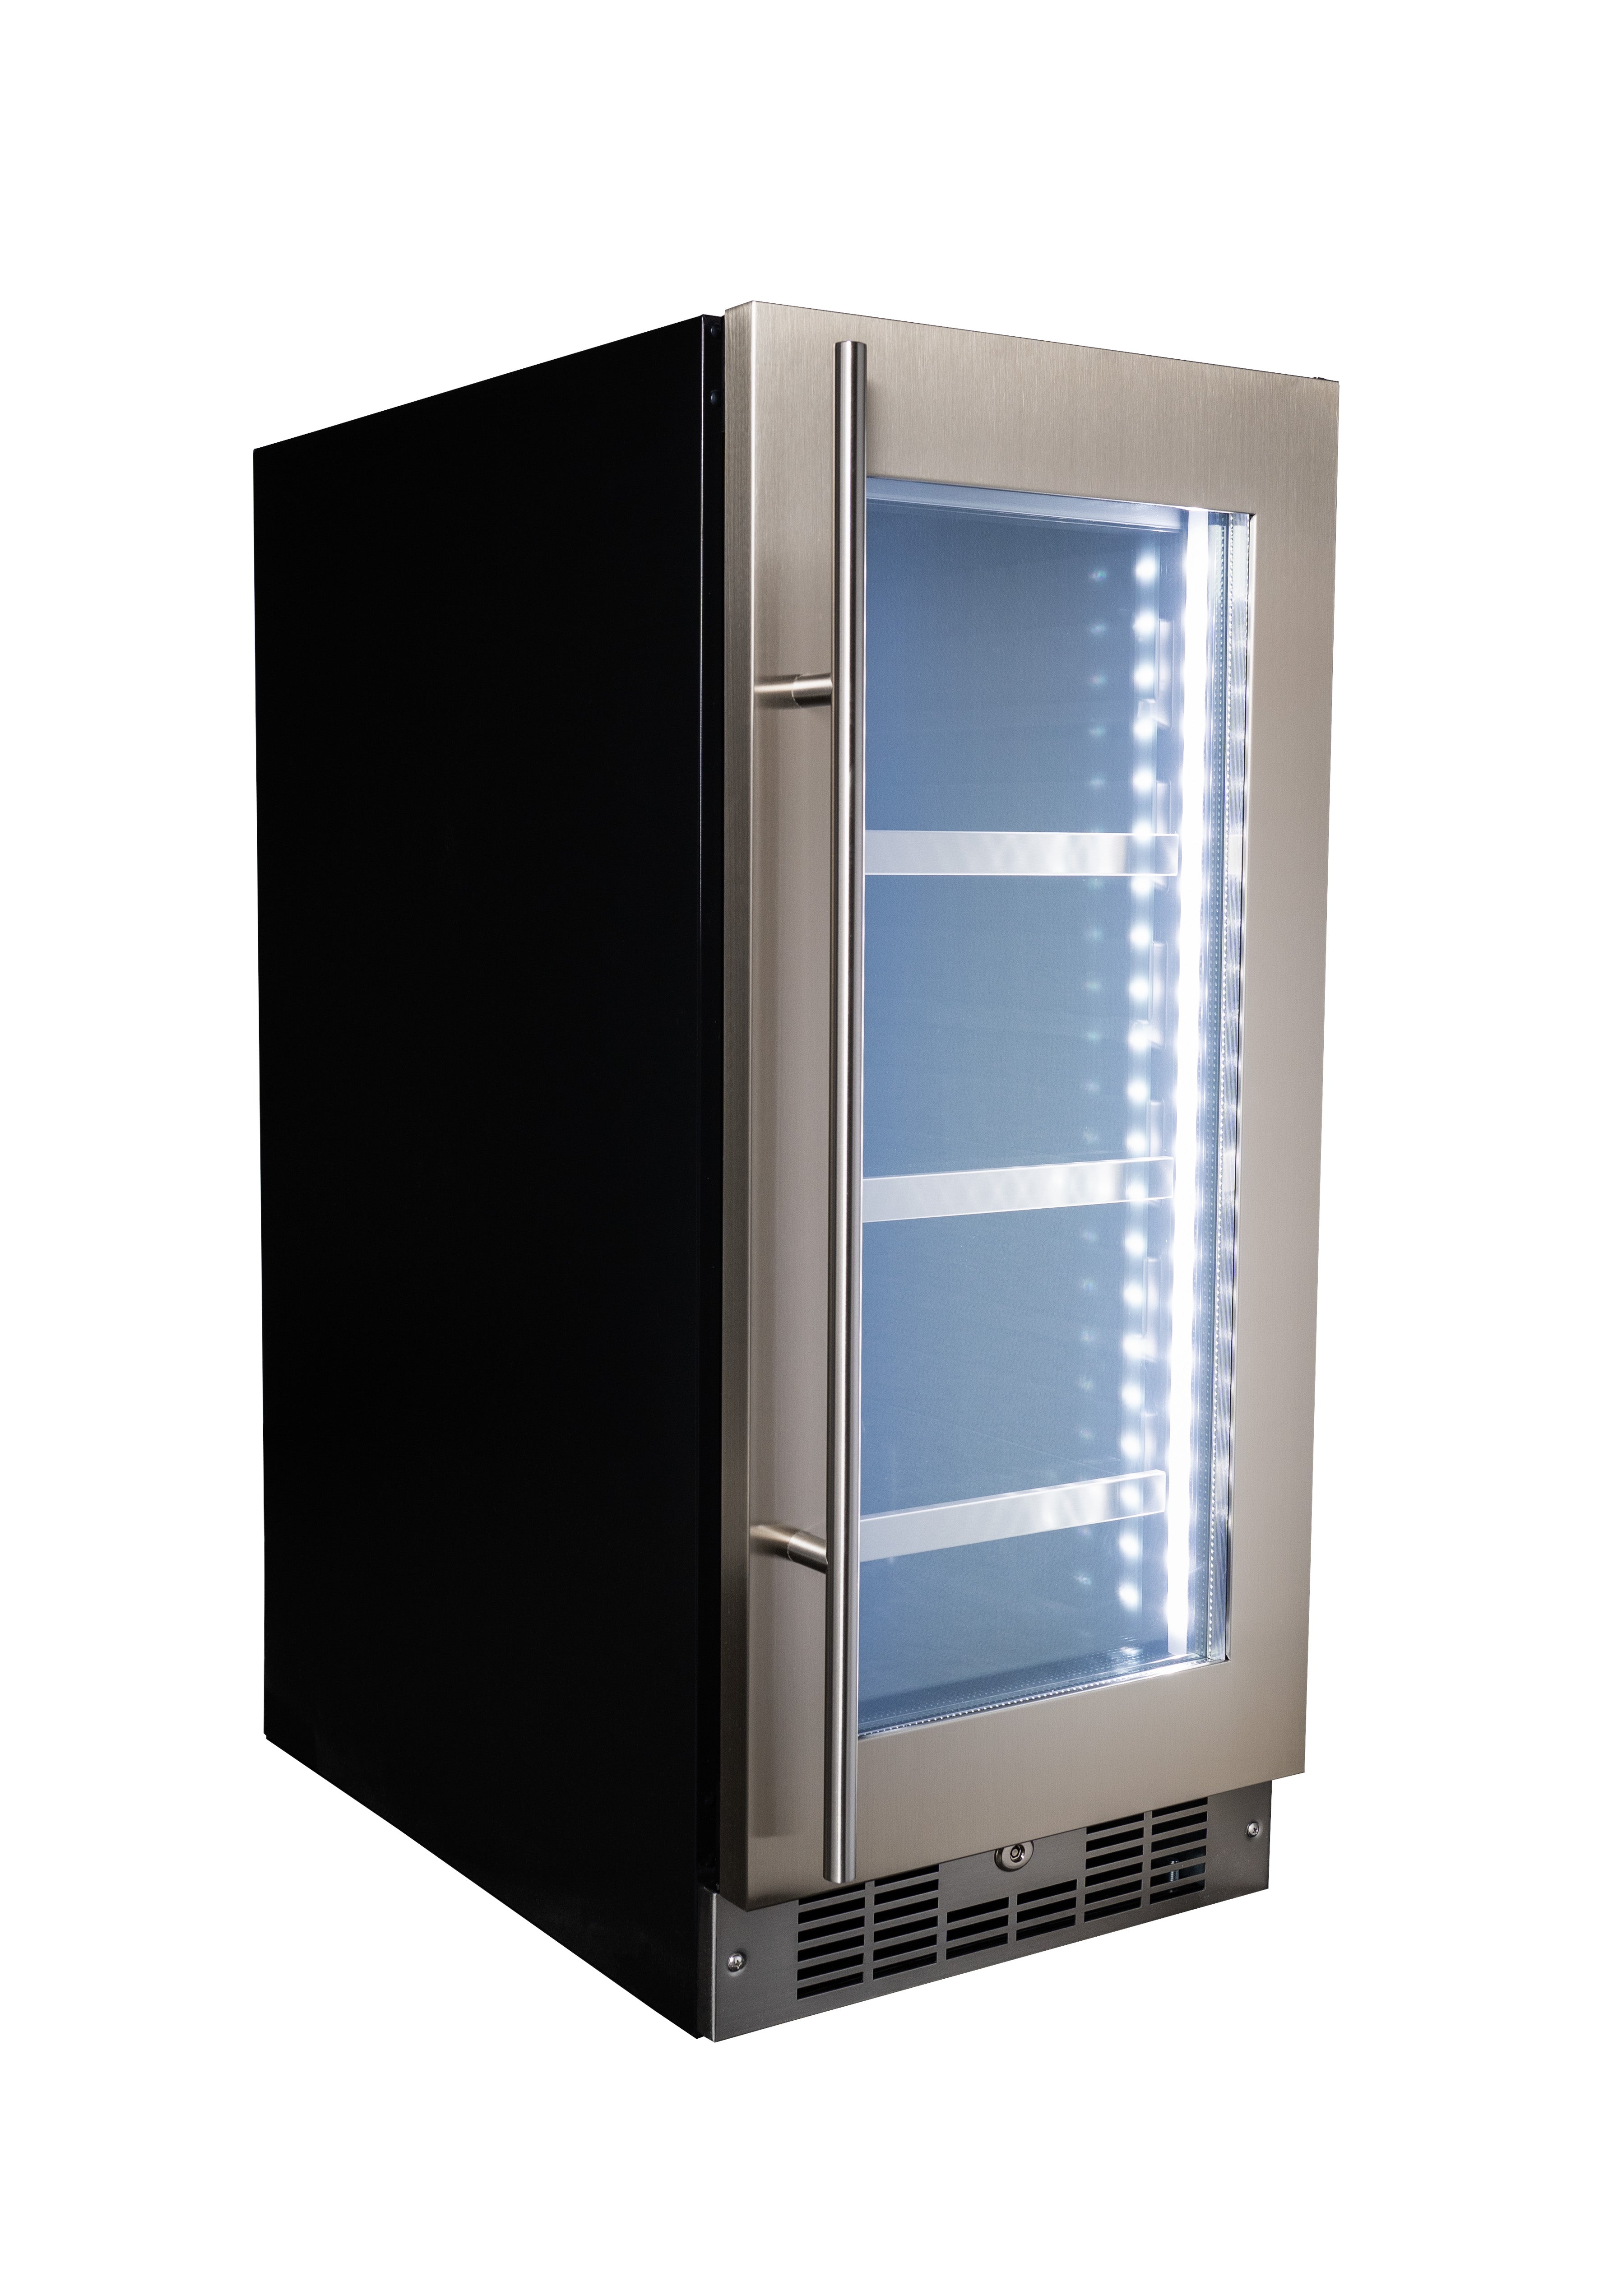 Silhouette - 14.9 Inch 3.3 cu. ft Beverage Centre Refrigerator in Stainless - SPRBC031D1SS